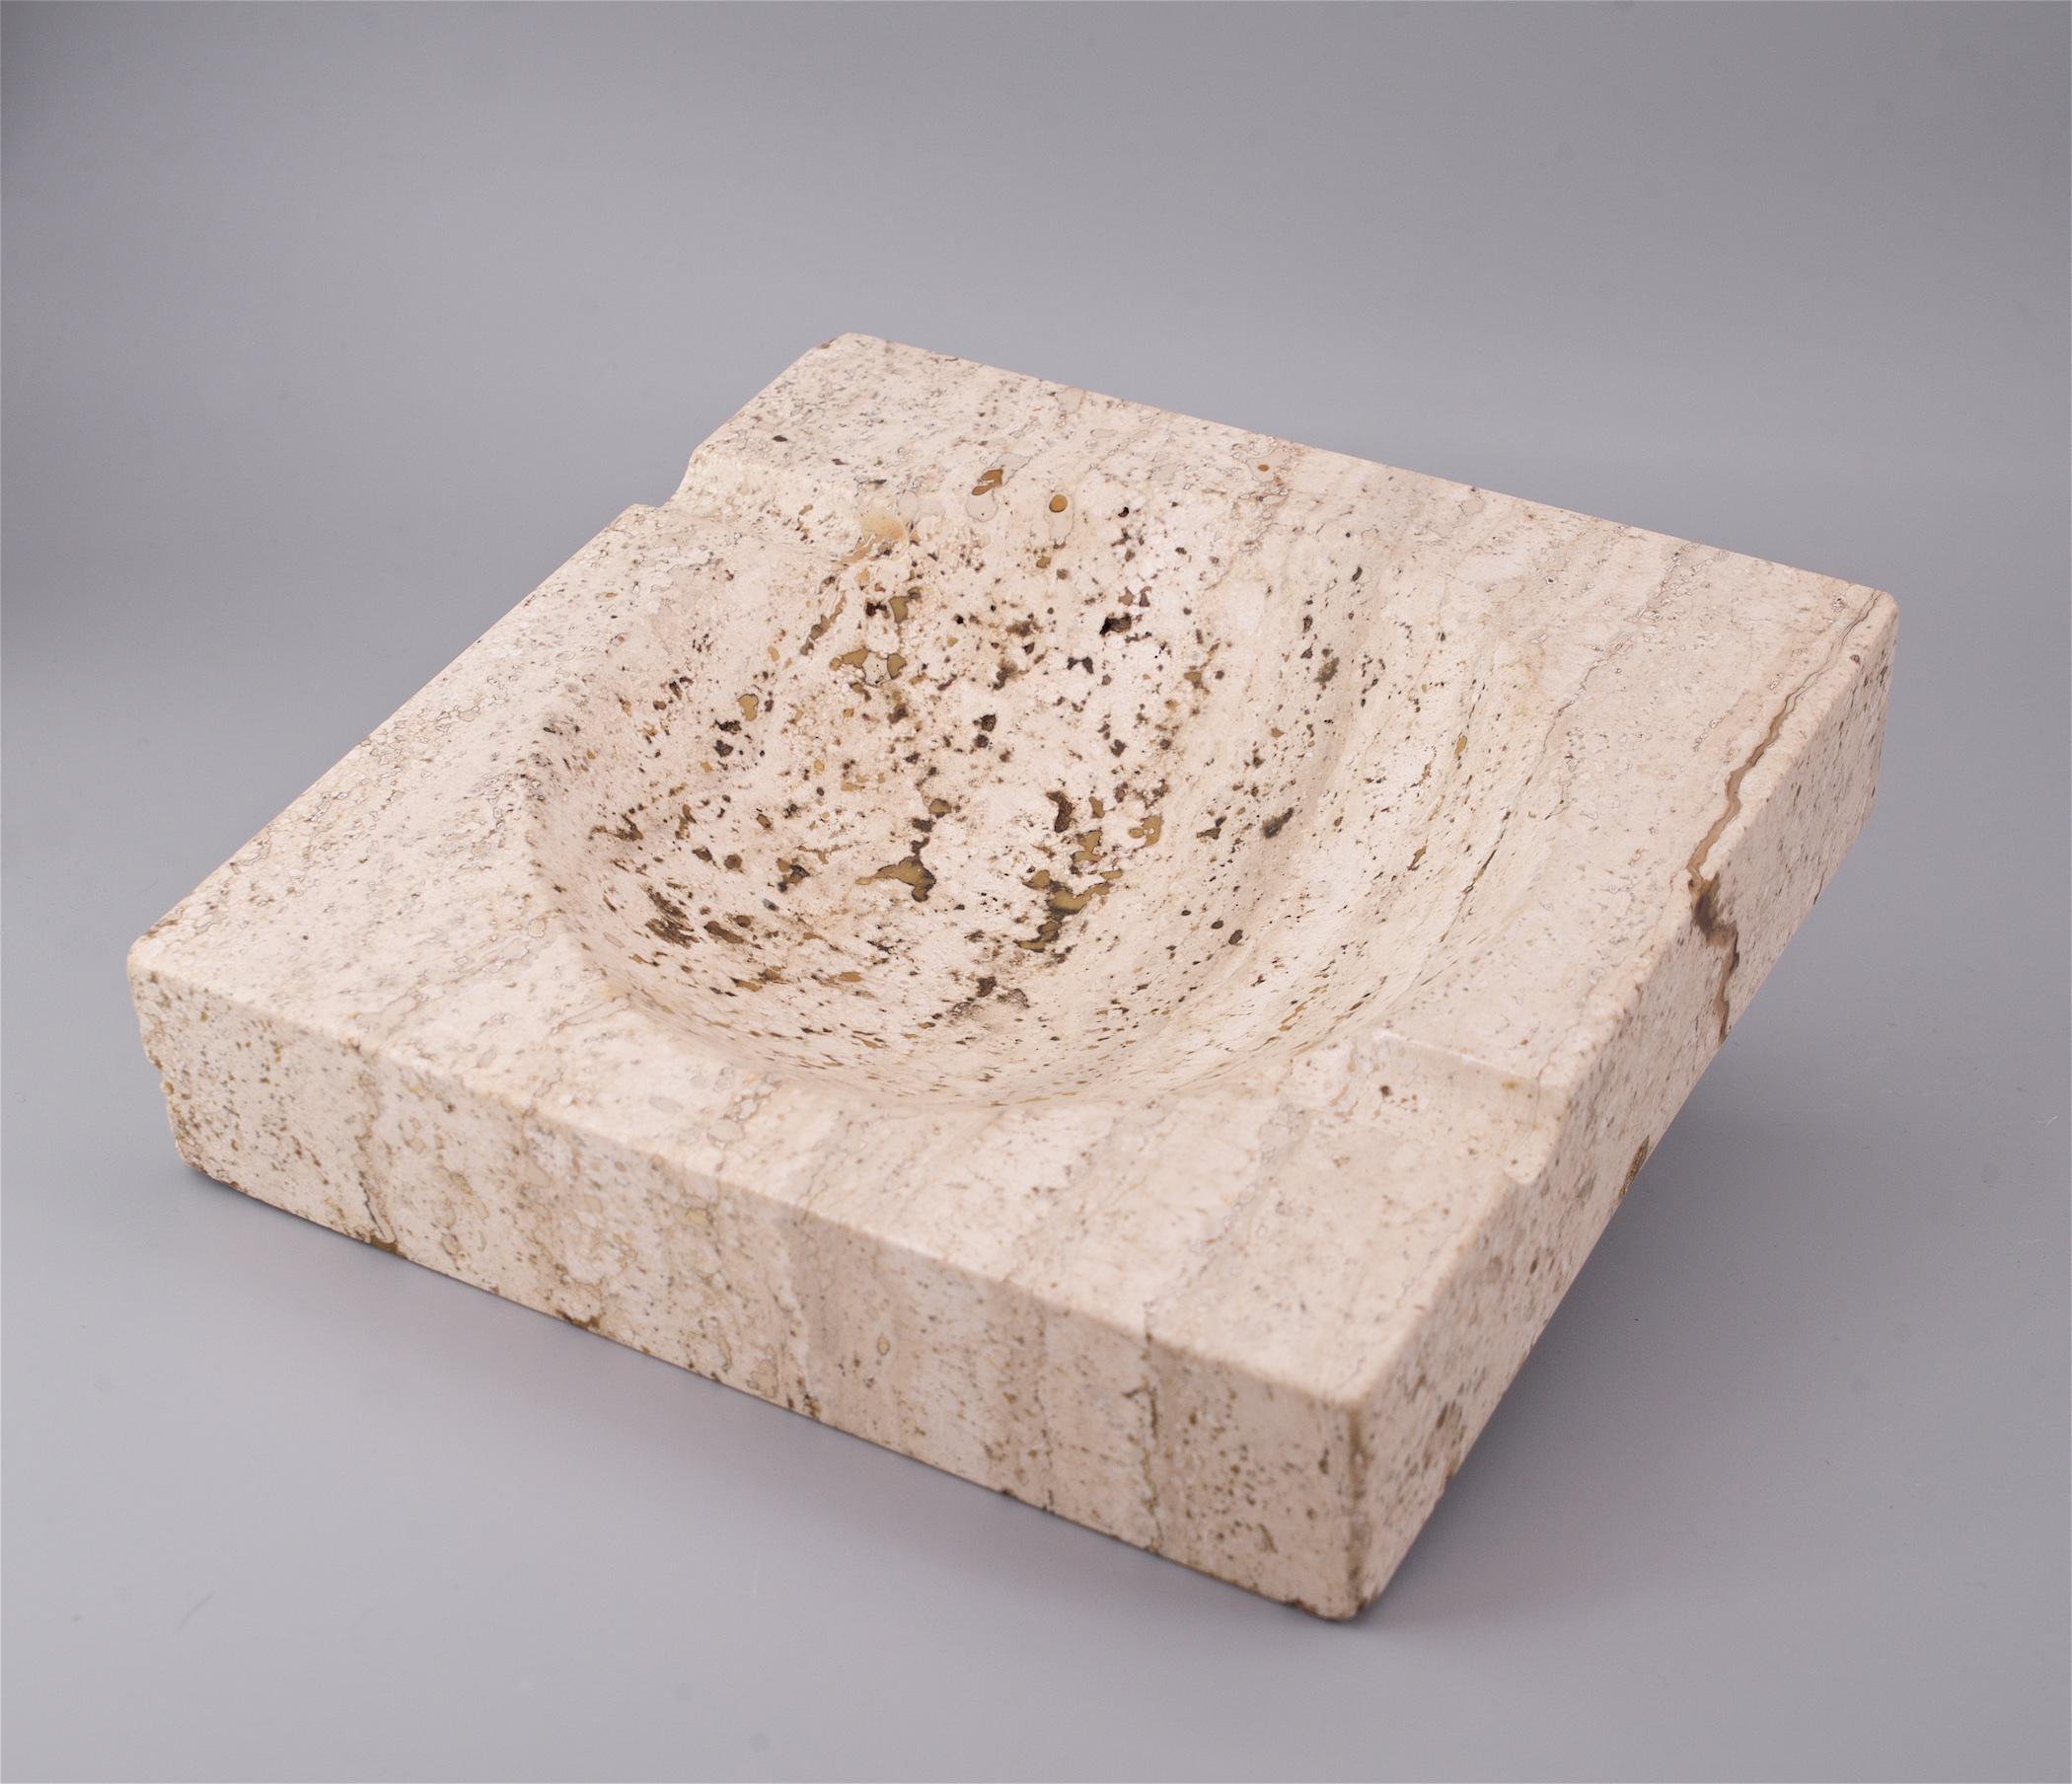 Great Large Size and Quality Heft. 7 by 7 and 3lbs. Showing pits naturally in the travertine and one small chip to a corners, pictured. Presents very well. No makers markings. Designer and Manufacturer remain unknown. only attributed. Procured from